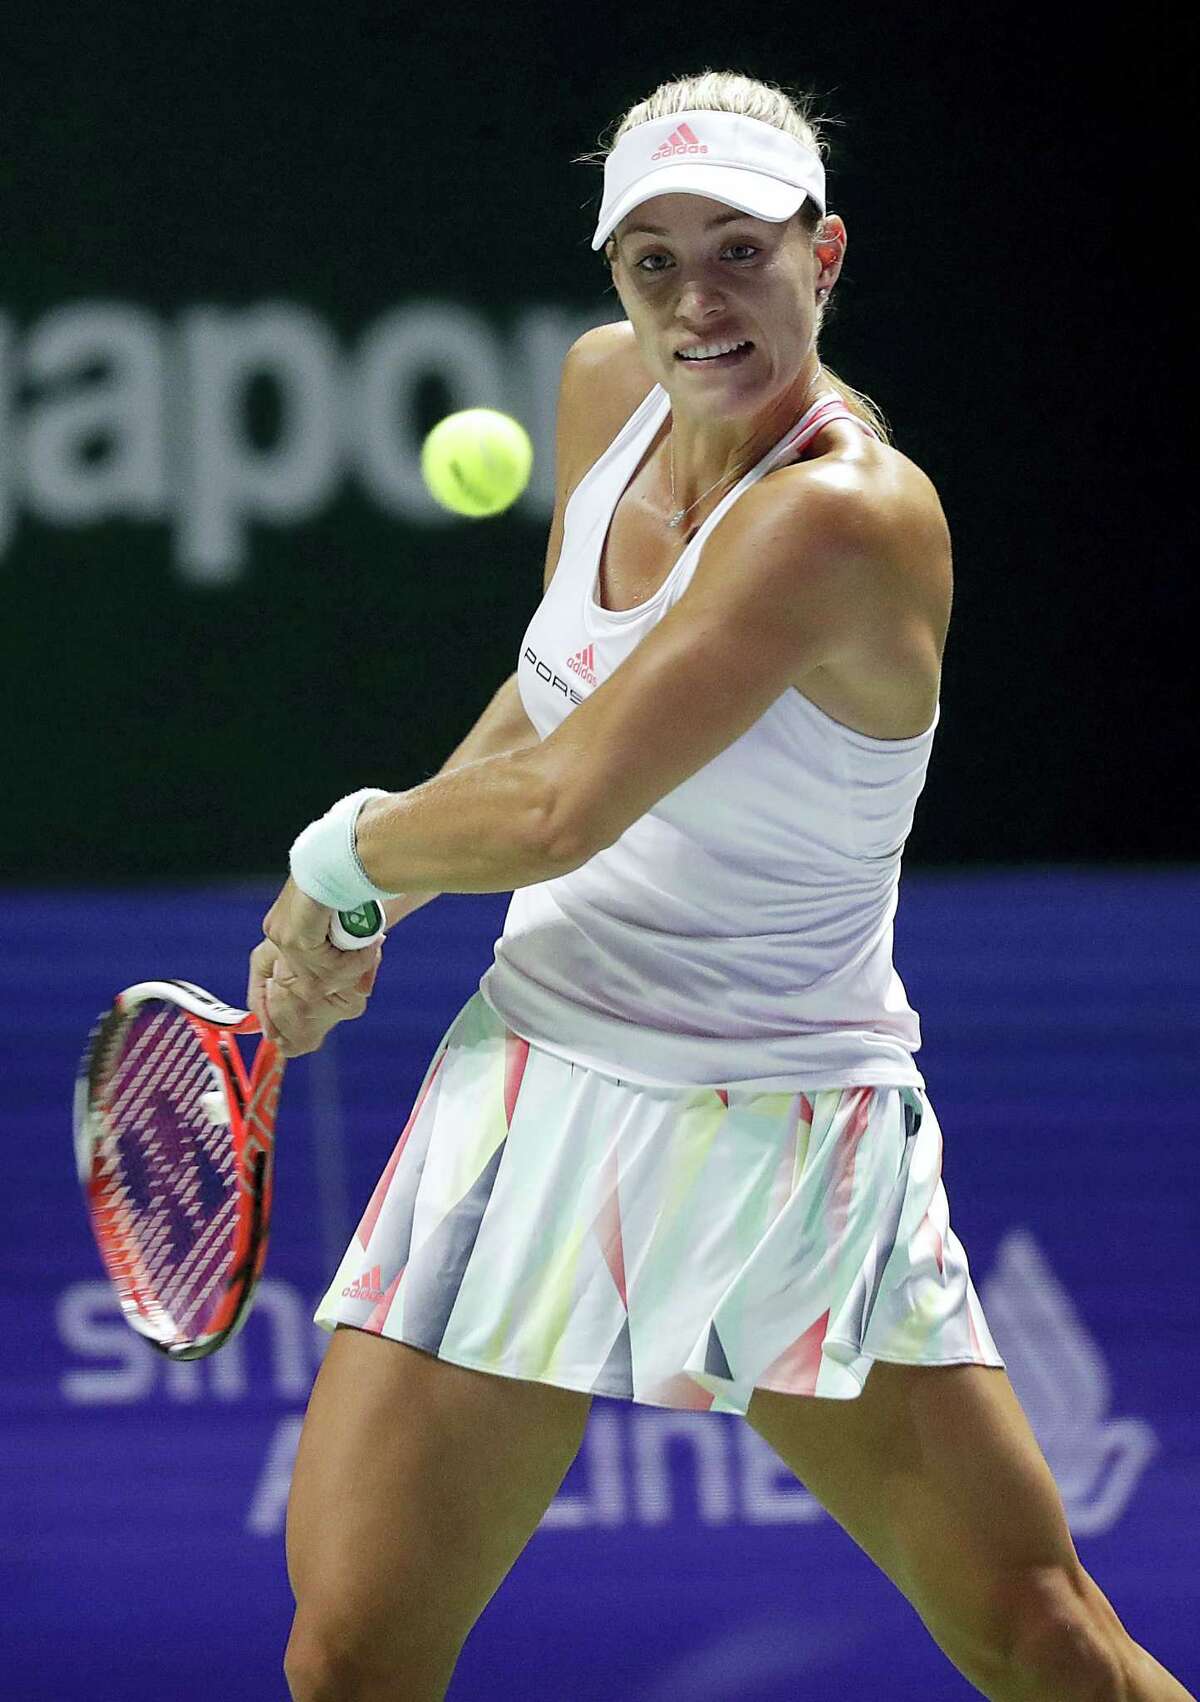 Angelique Kerber of Germany makes a backhand return to Dominika Cibulkova of Slovakia during their women’s final match at the WTA tennis tournament in Singapore on Oct. 30, 2016.